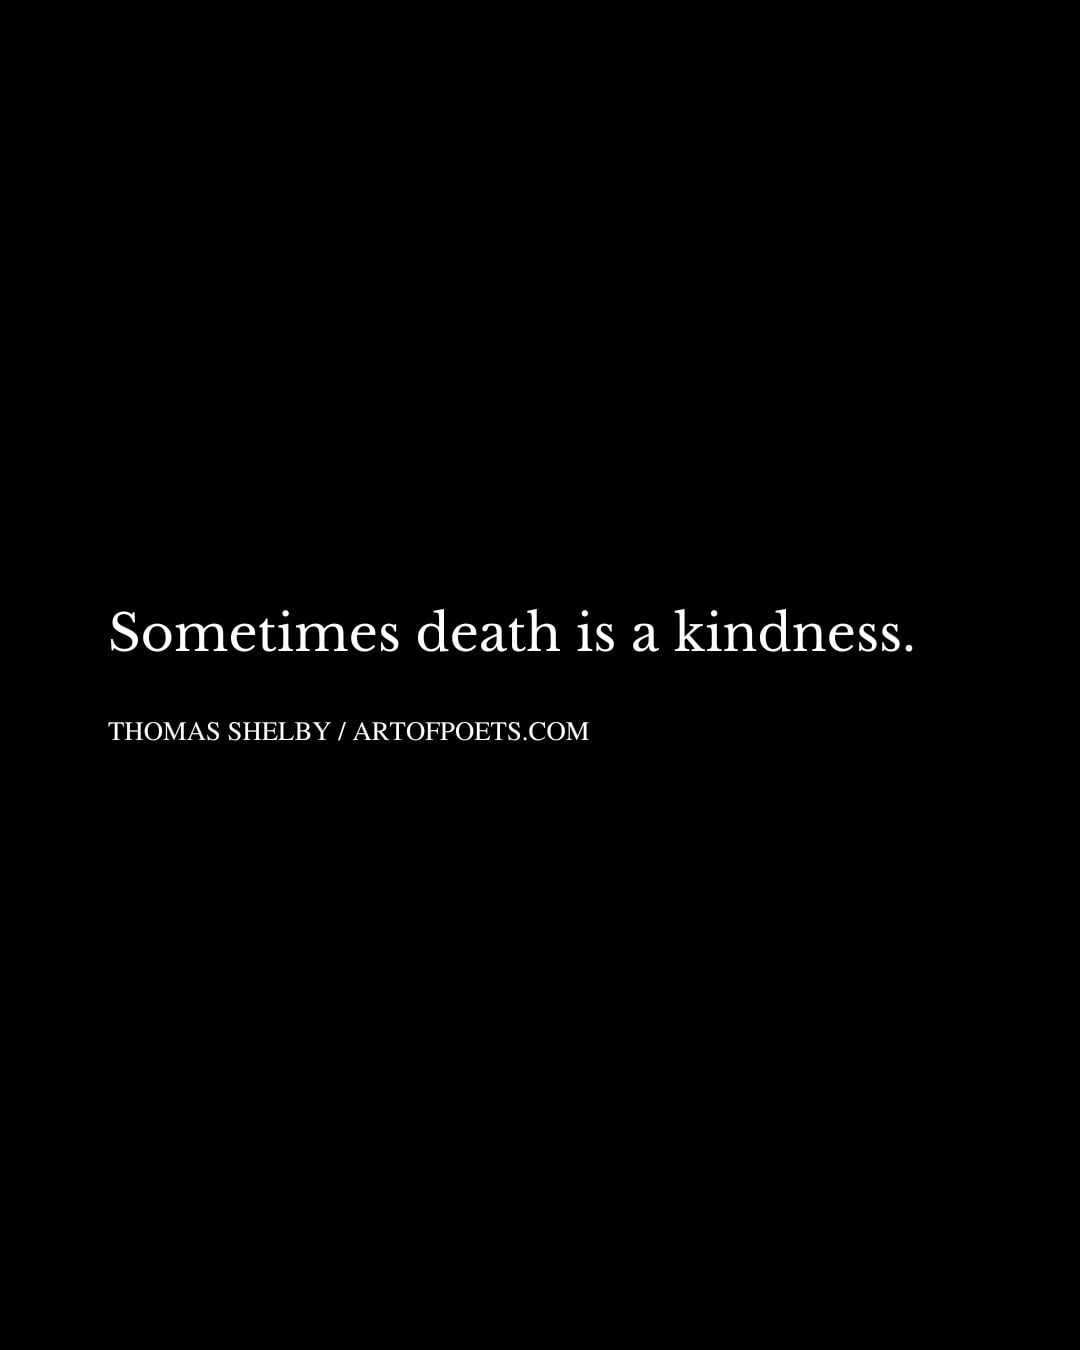 Sometimes death is a kindness